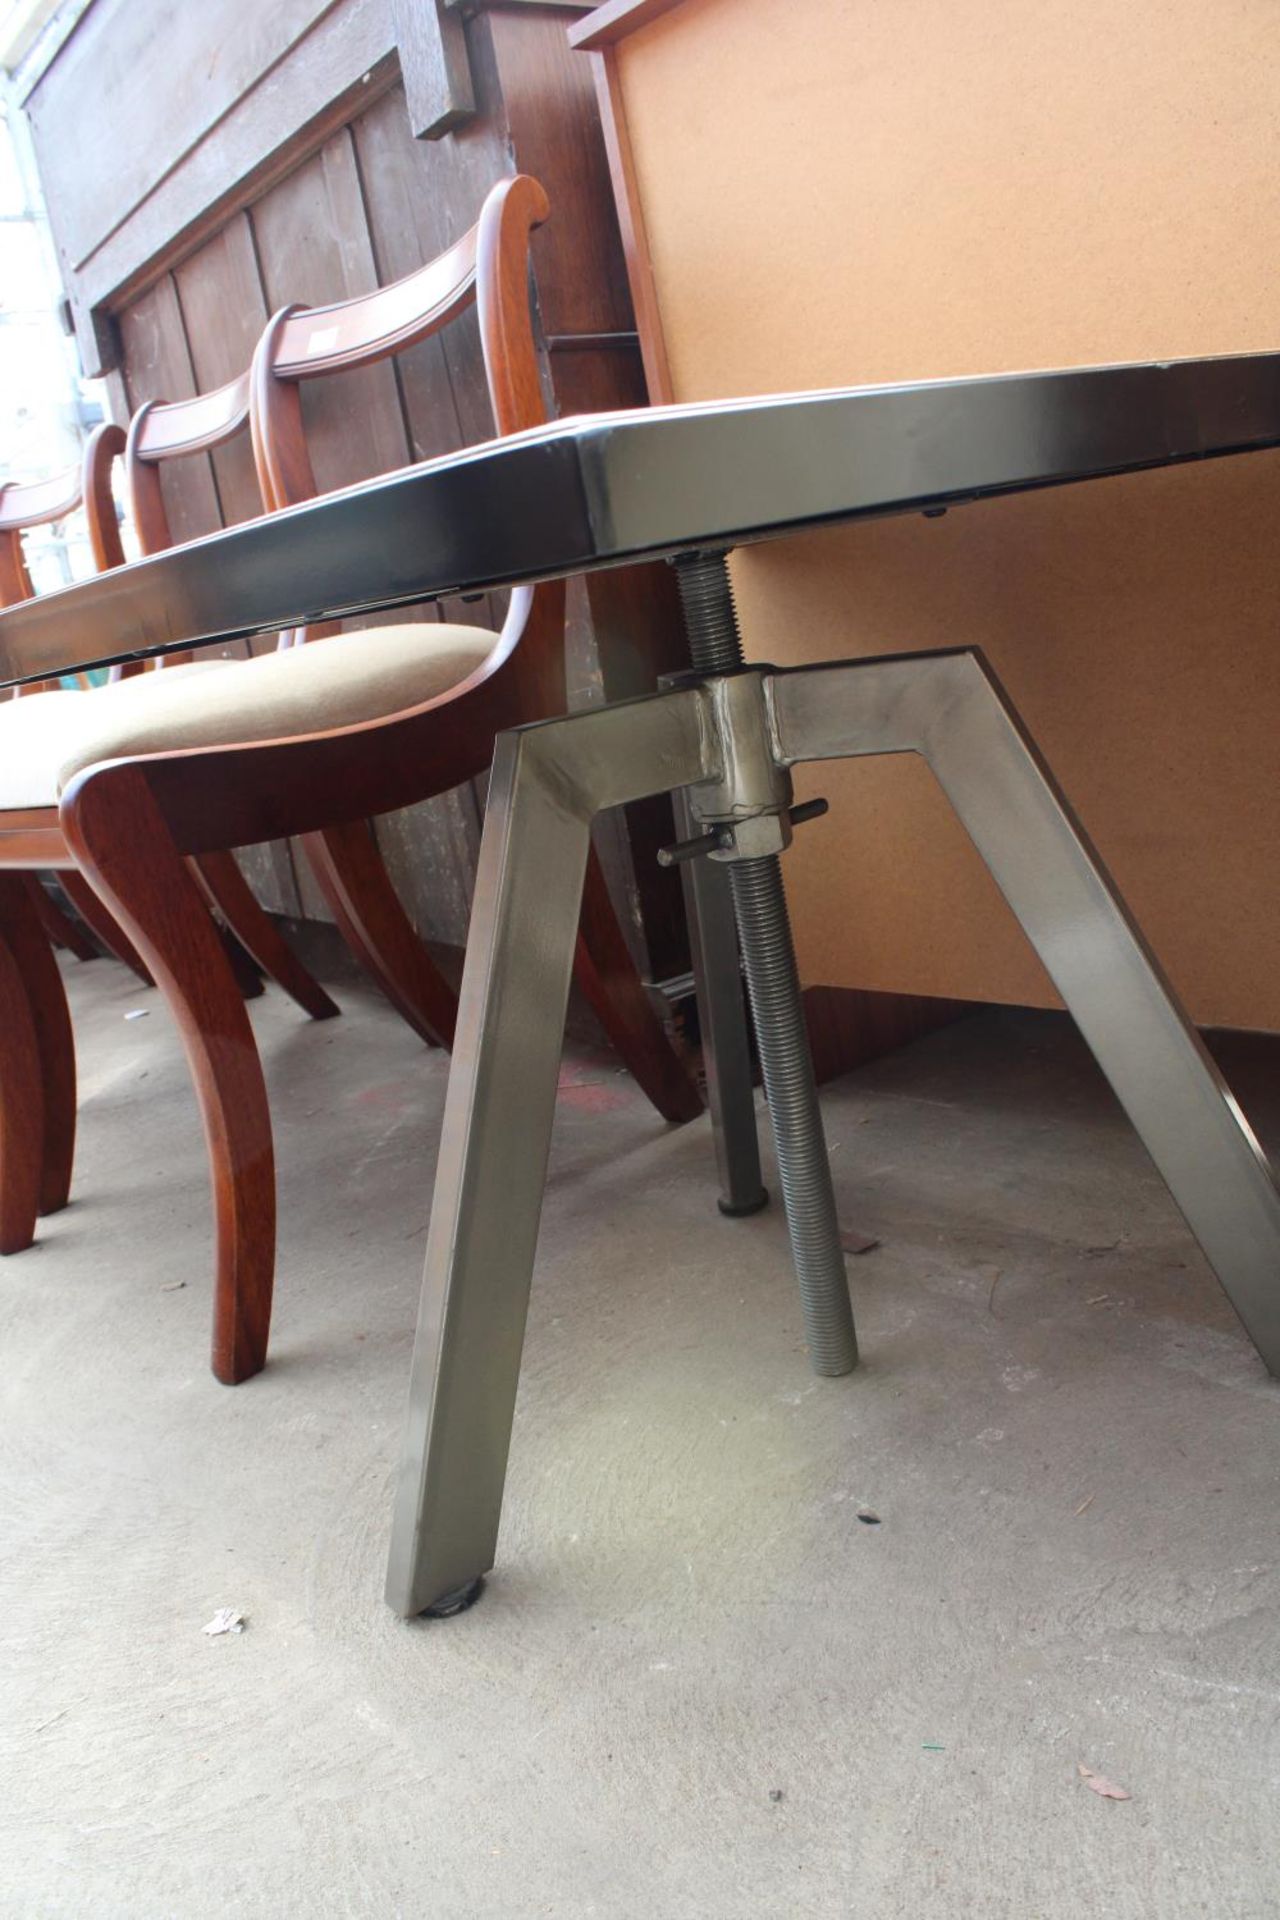 A 27.5" SQUARE HEIGHT ADJUSTABLE OCCASIONAL TABLE WITH METAL LEGS AND FRAME - Image 2 of 3